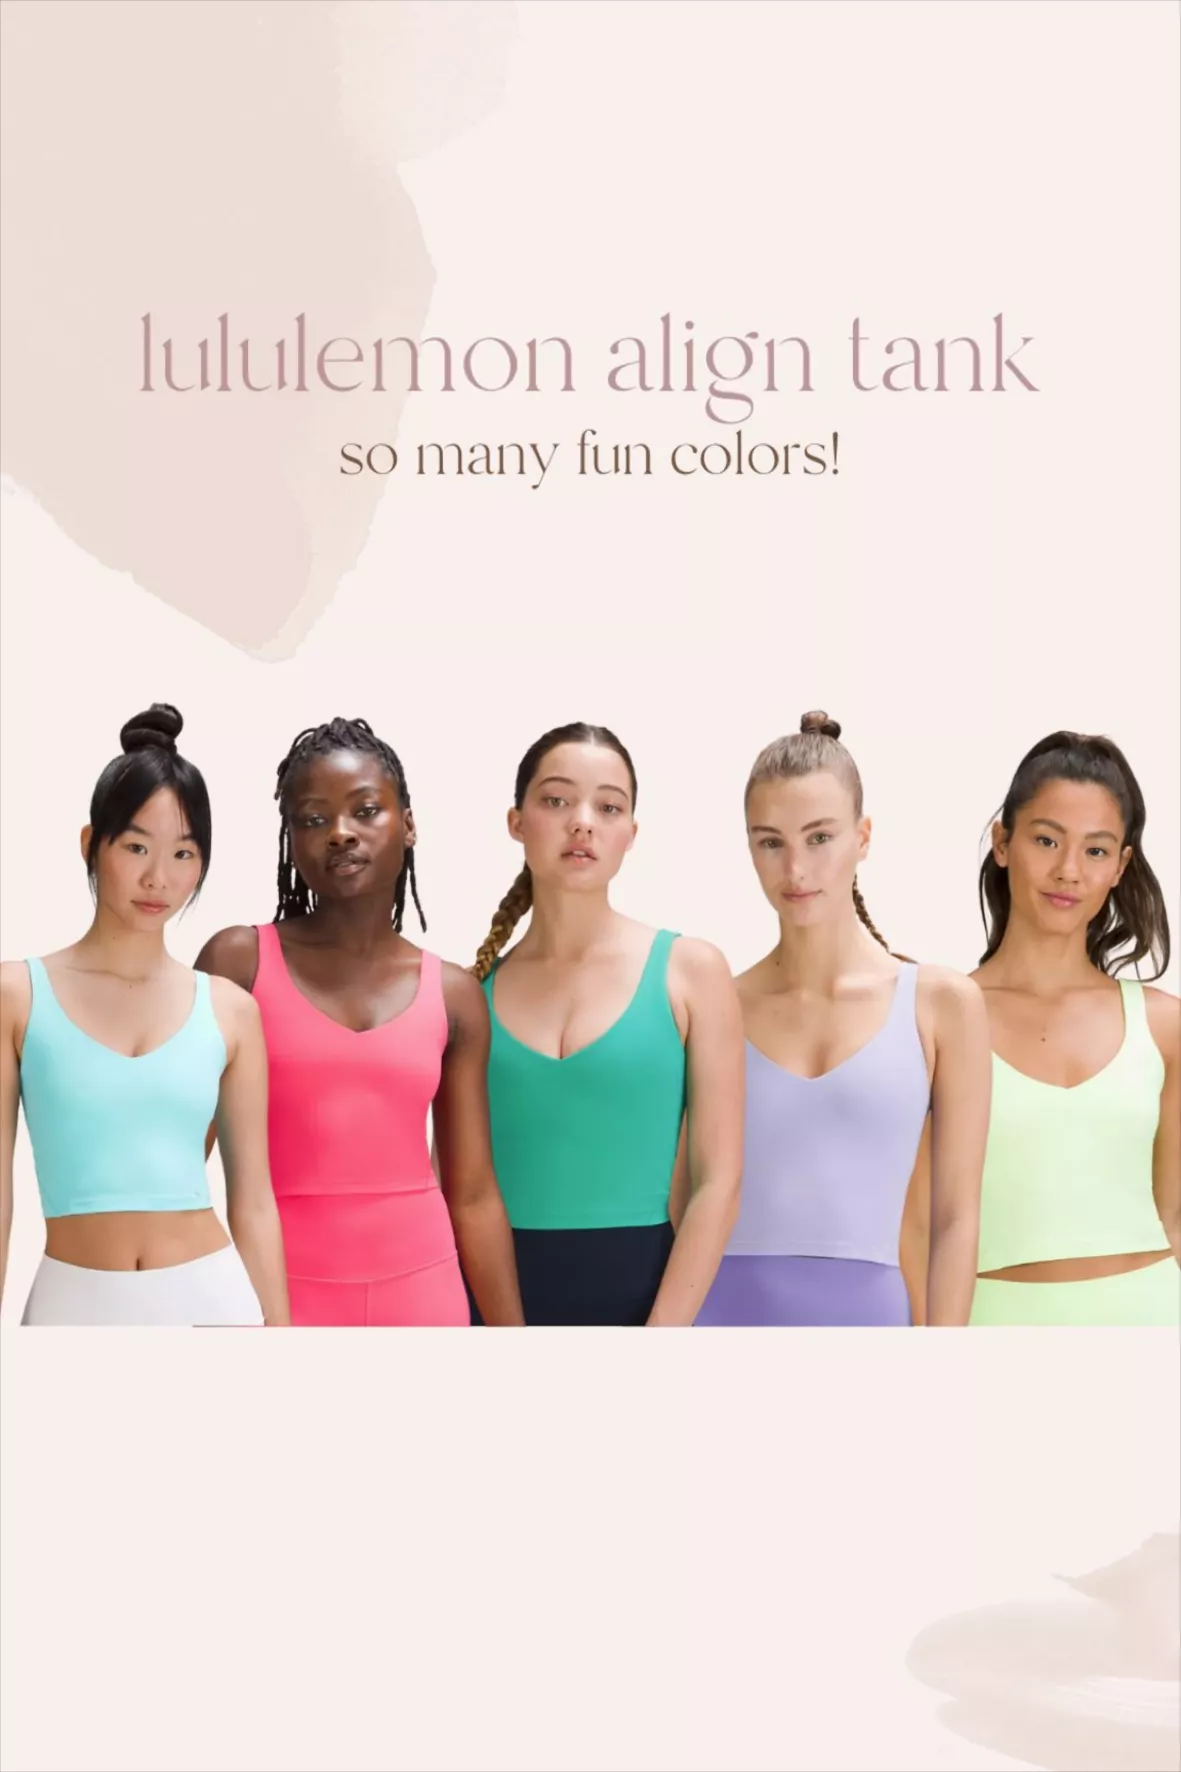 Okkkkk you know when you find something SO GOOD, you need to share it with  all your friends!?🤩 Well here you go! Lululemon align who